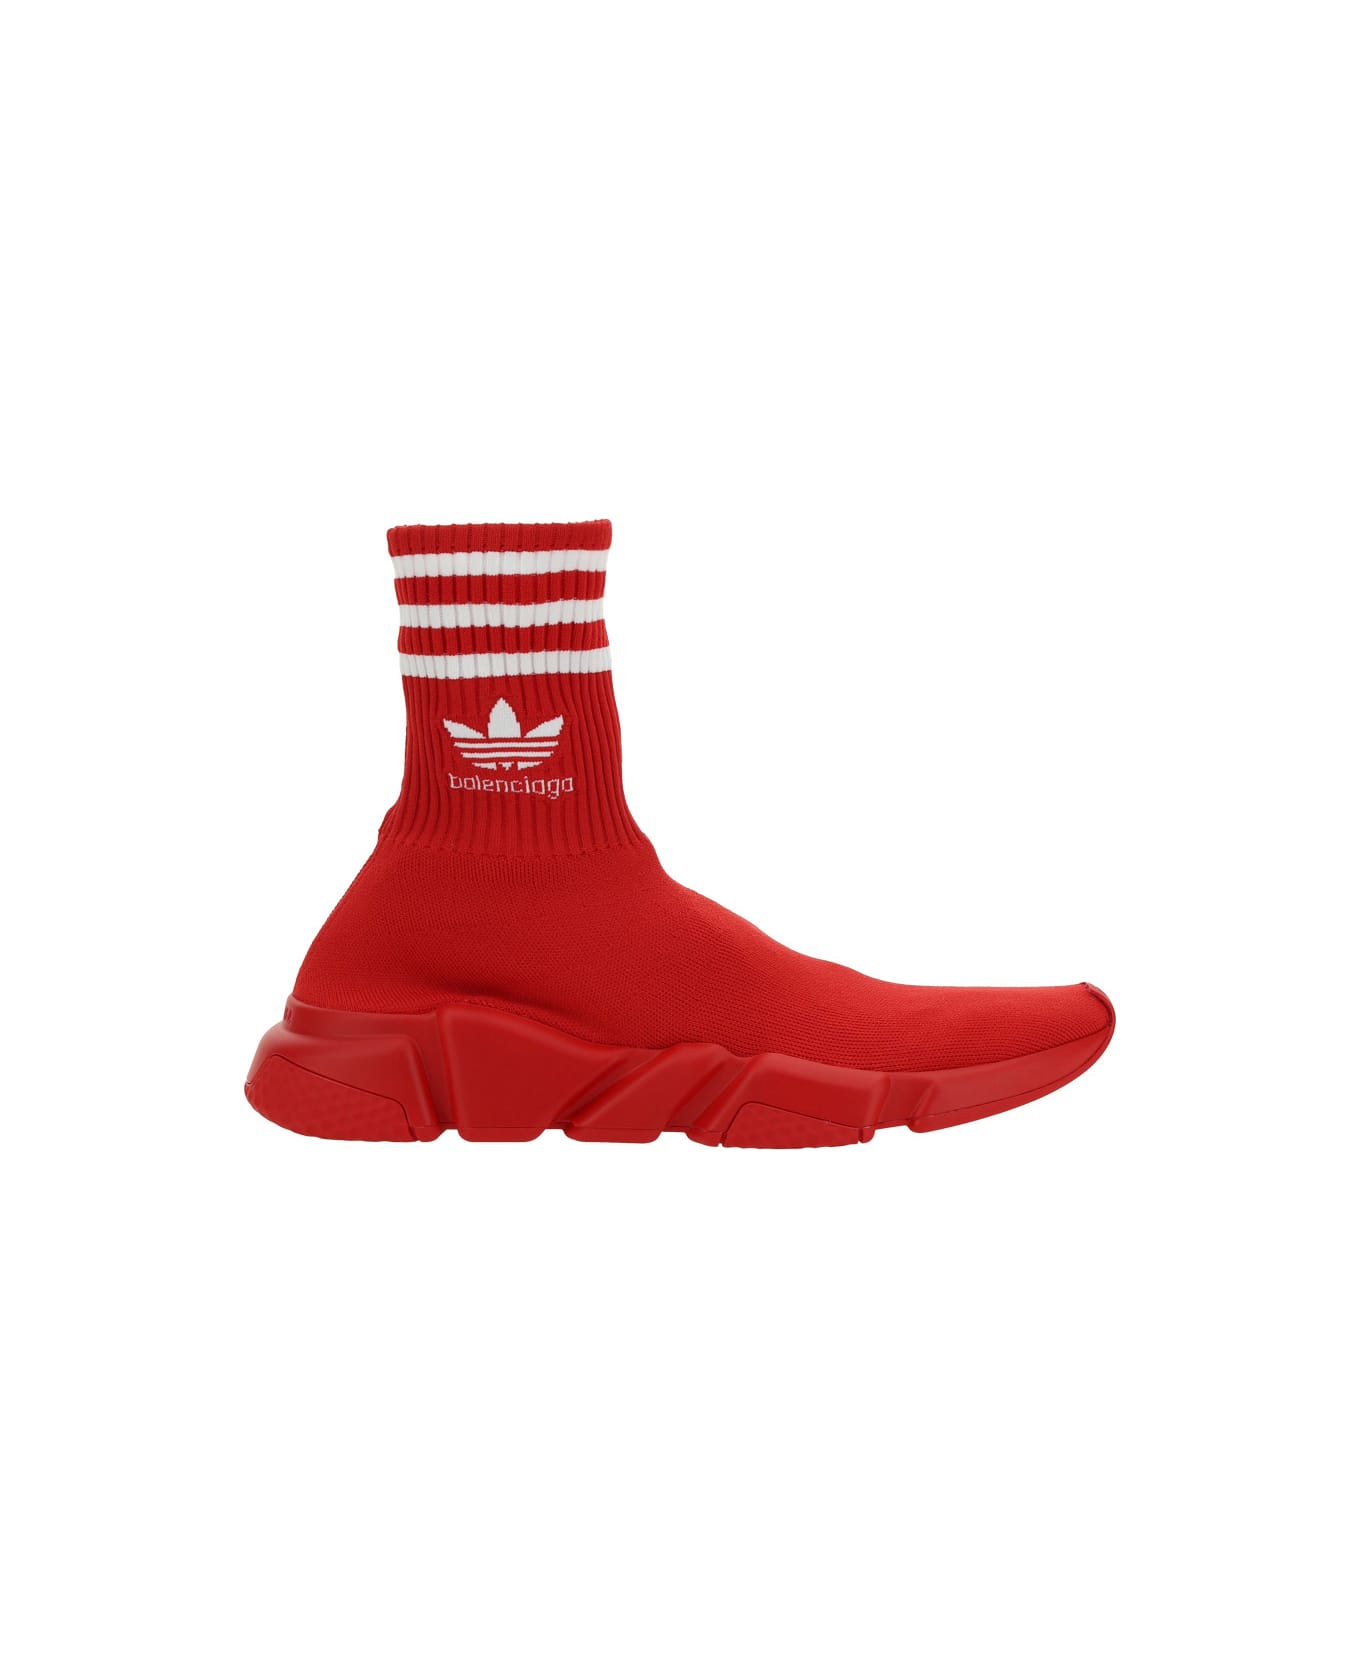 Balenciaga X Adidas -speed Trainers Knitted Sock-sneakers - red